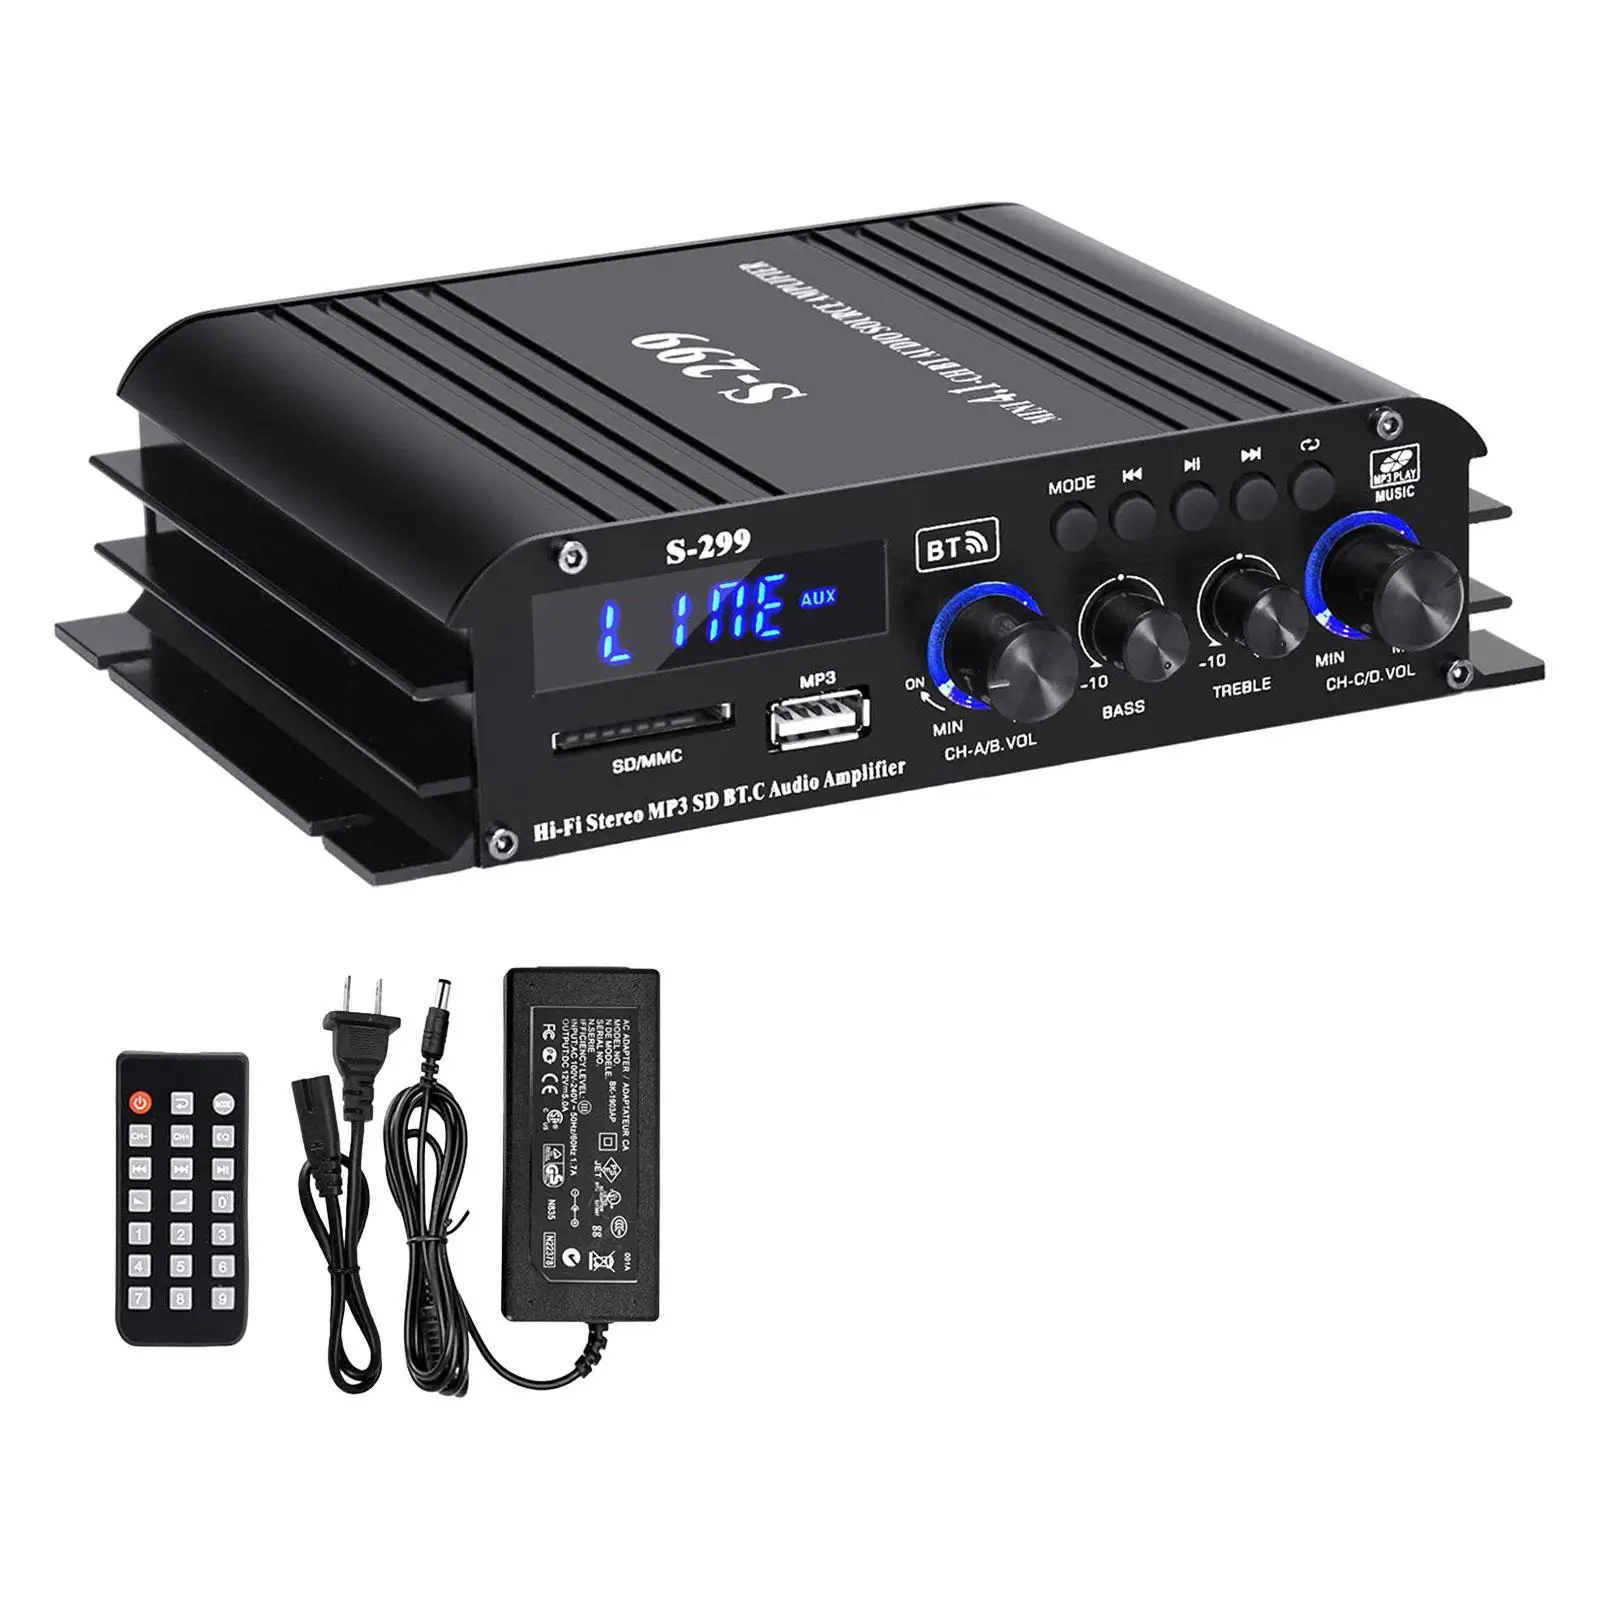 Power Amplifier Portable for Store Home Theater Subwoofer HiFi Stereo Amp MP3 USB AUX BT SD 4.1 Channel 40wx4 with Power Adapter